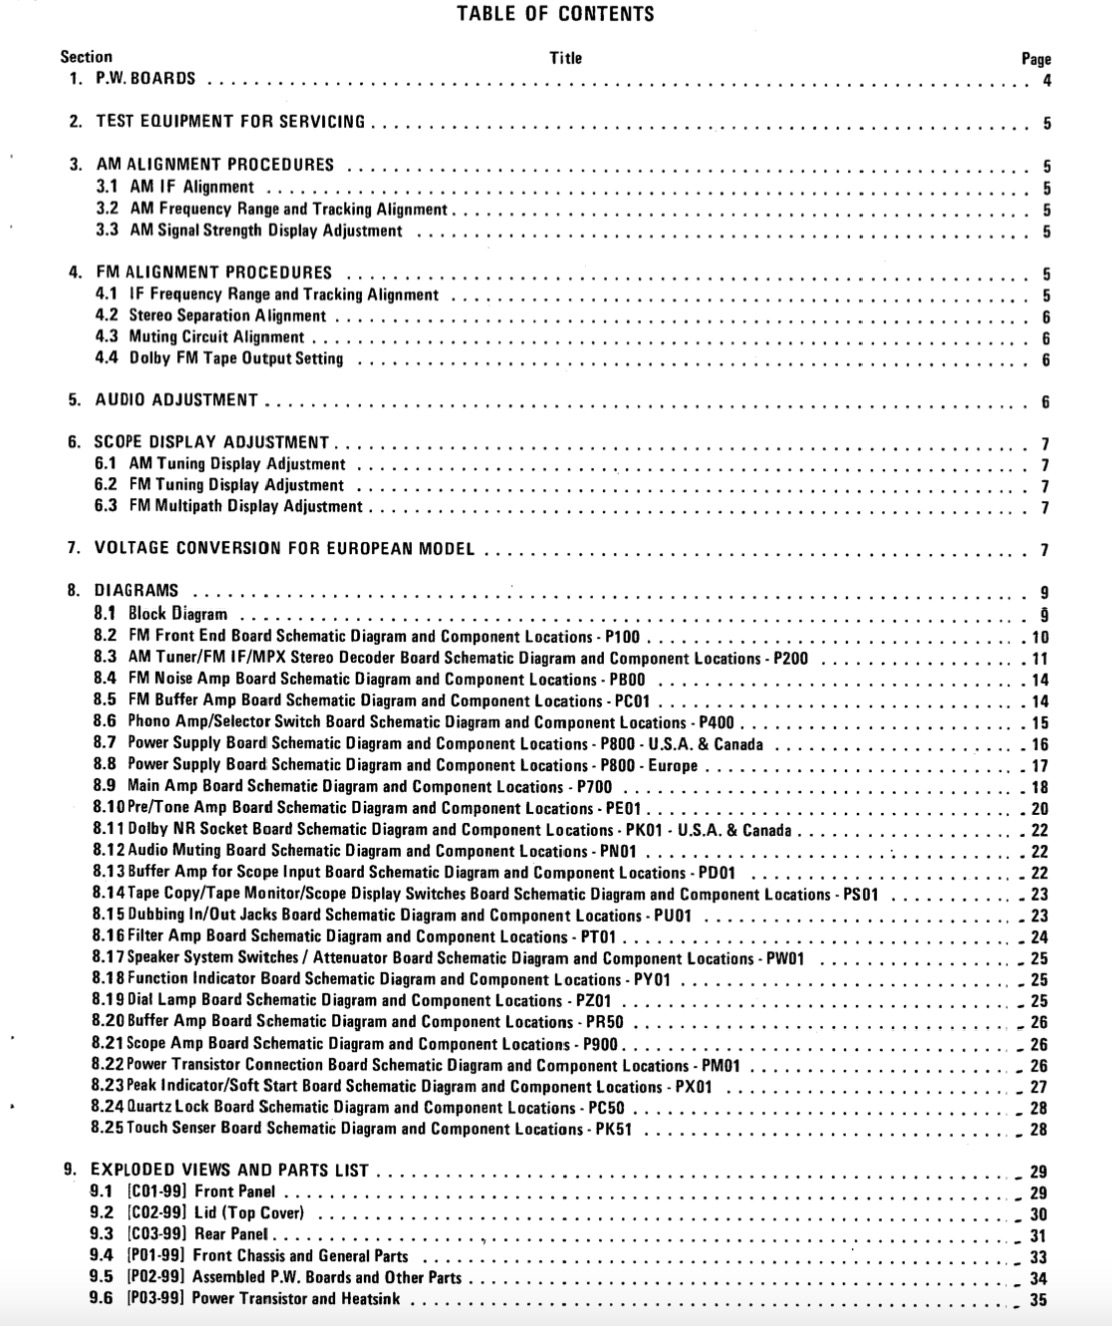 Marantz Model 2600 Stereophonic Receiver Service Manual, Parts List, Exploded View, Wiring and Schematic Diagram